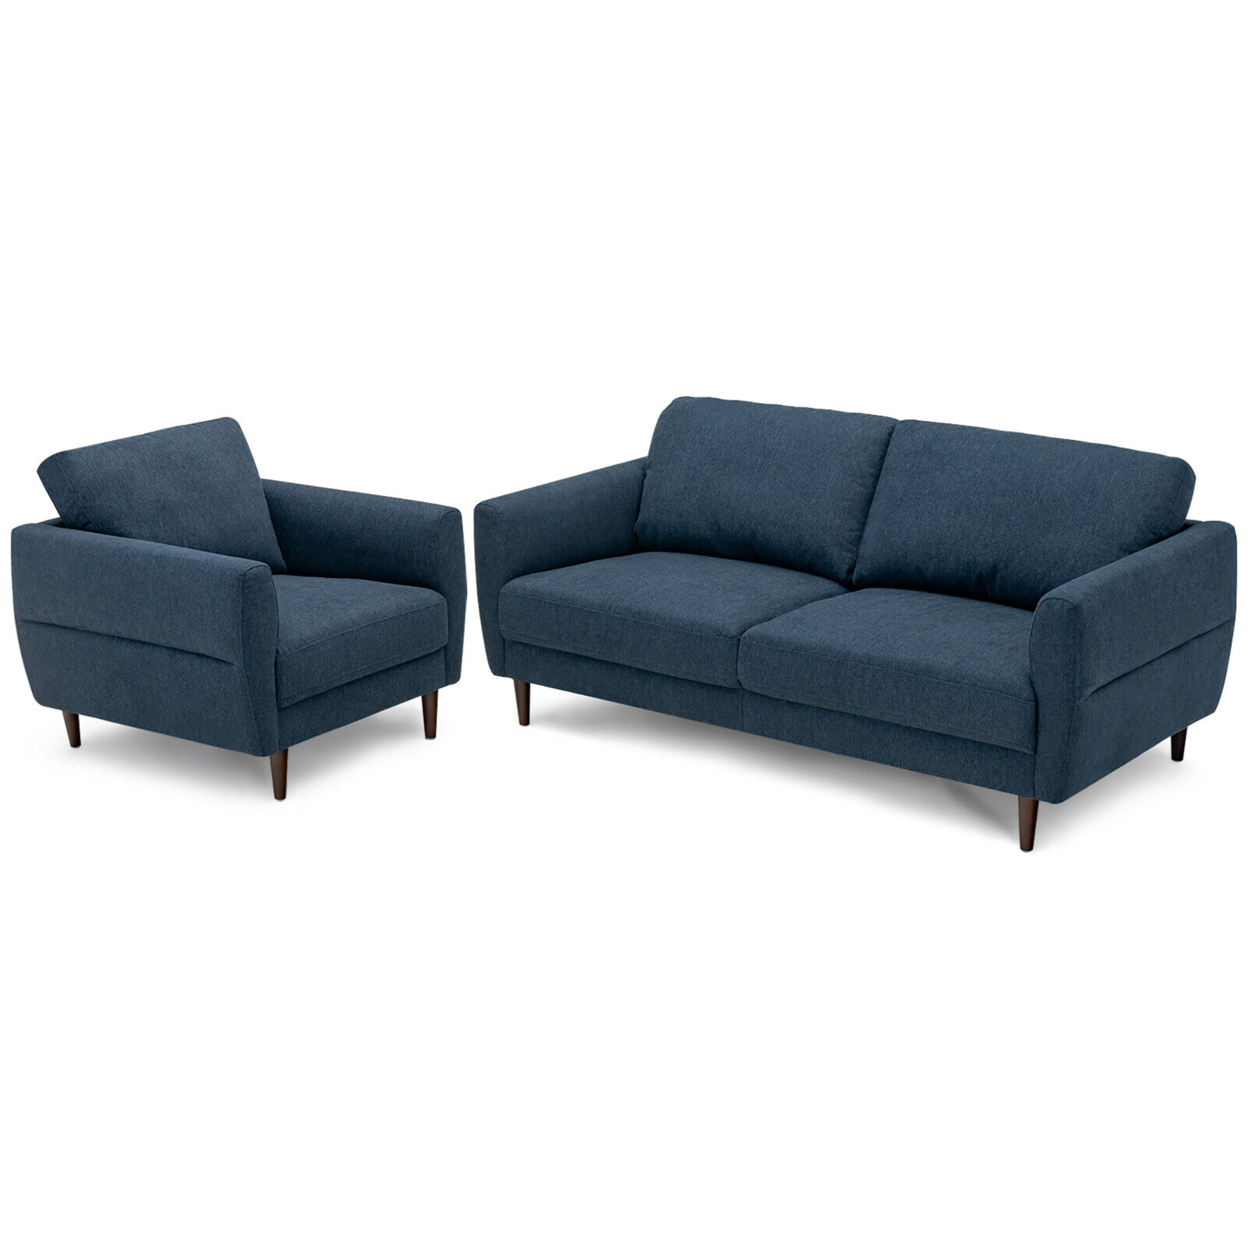 2 Pieces Living Room Sofa Set Modern Fabric Sofa Couch & Accent Chair Set - Navy